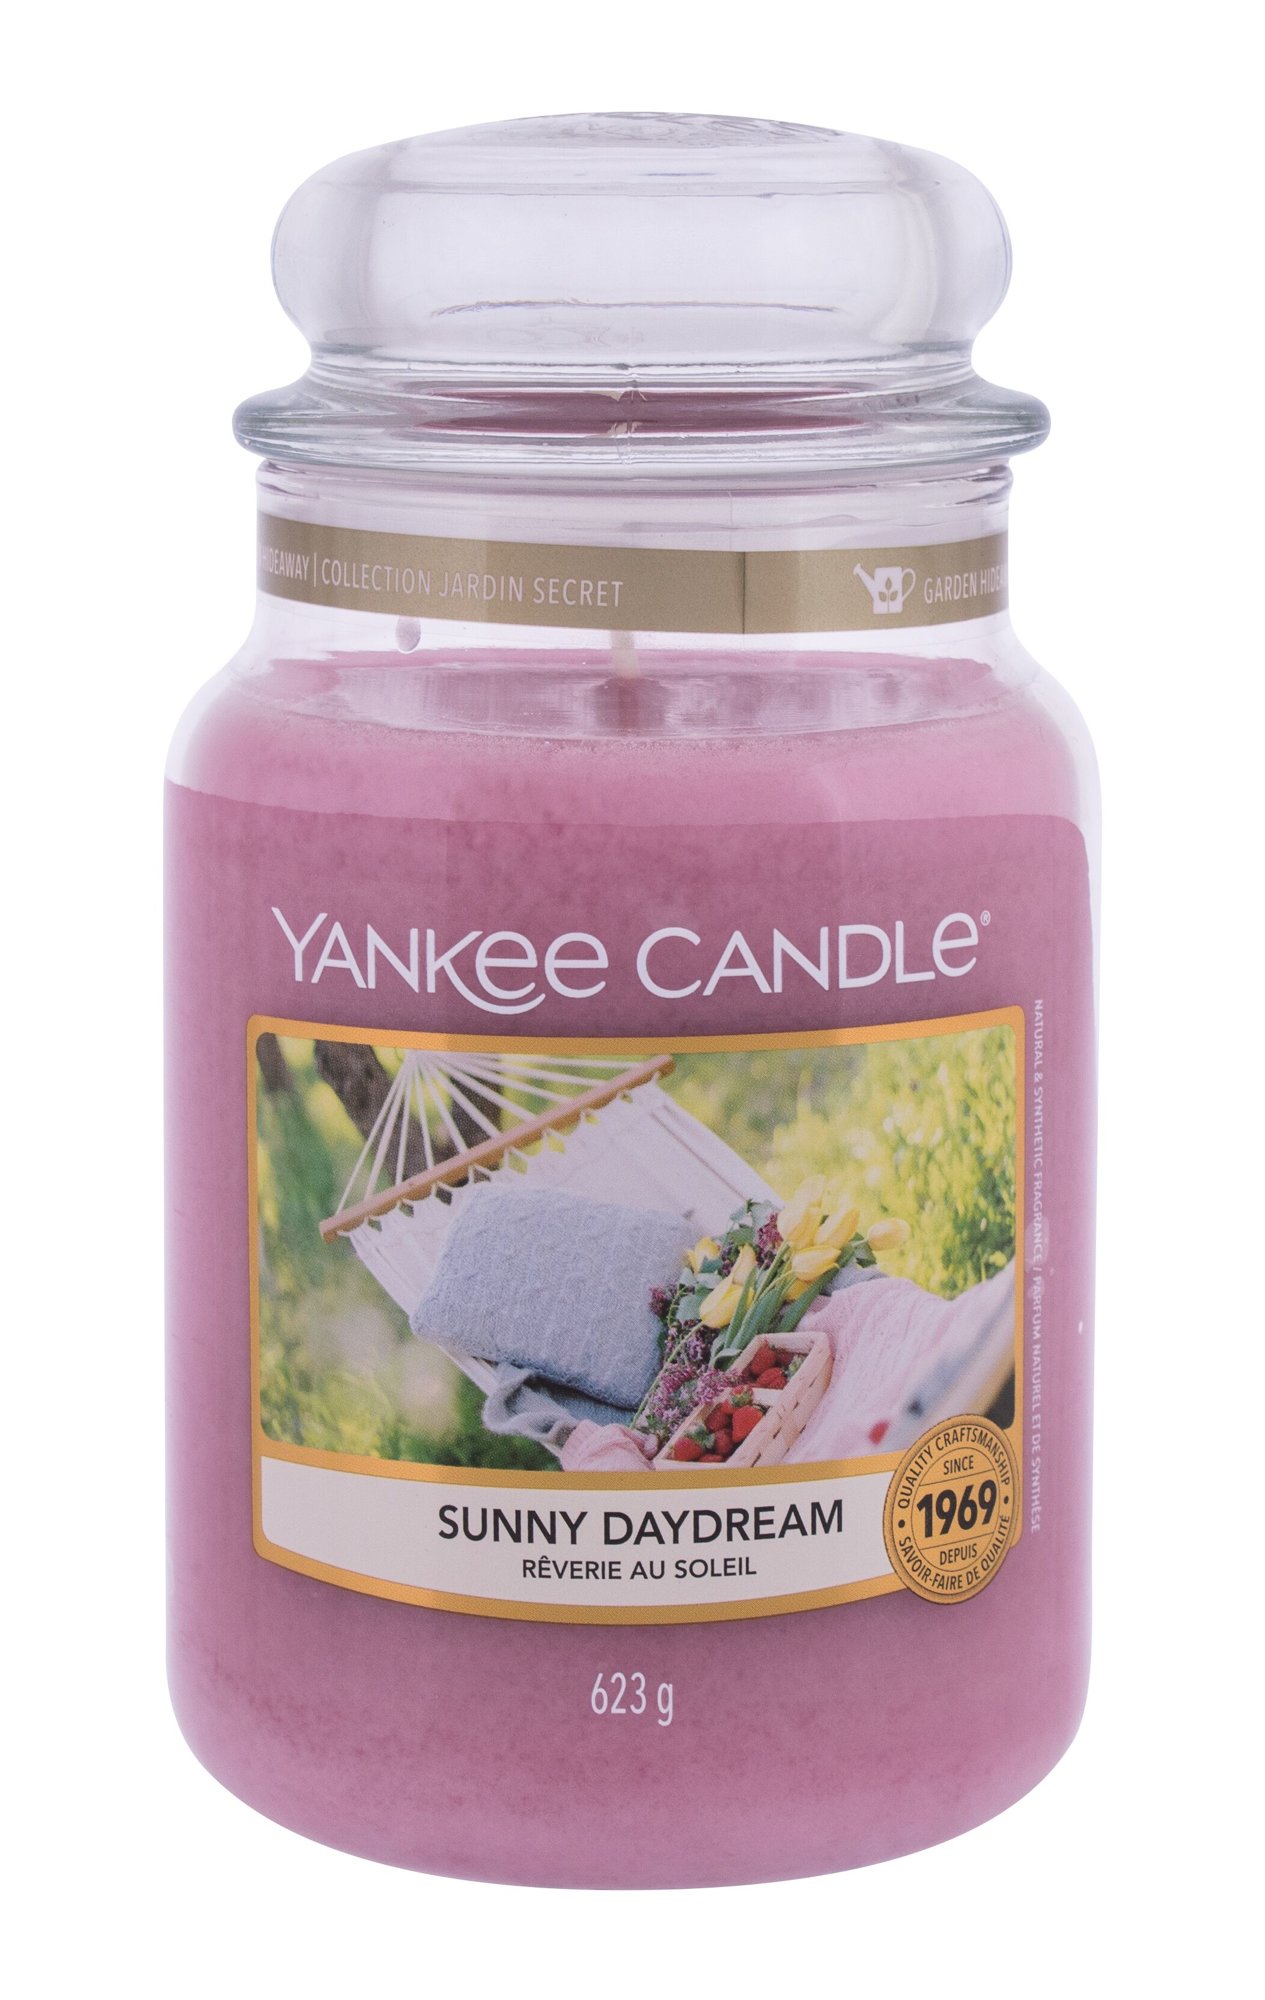 Yankee Candle Sunny Daydream 623g Kvepalai Unisex Scented Candle